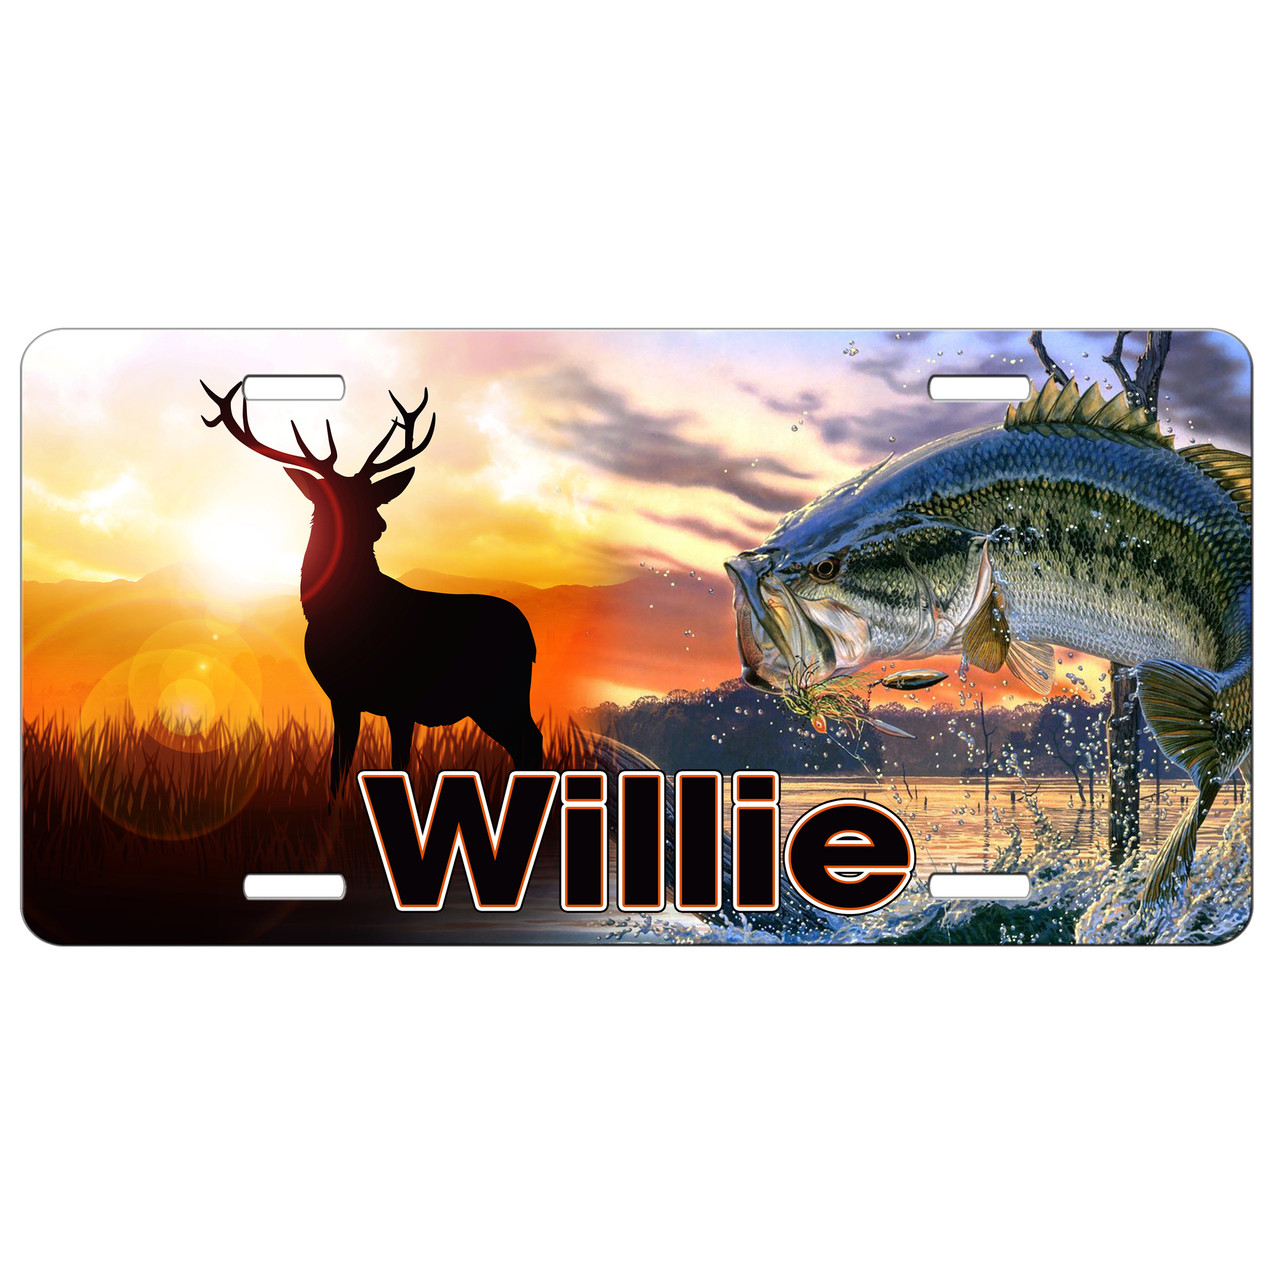 New Design of Freshwater Fishing License Plate Now Available